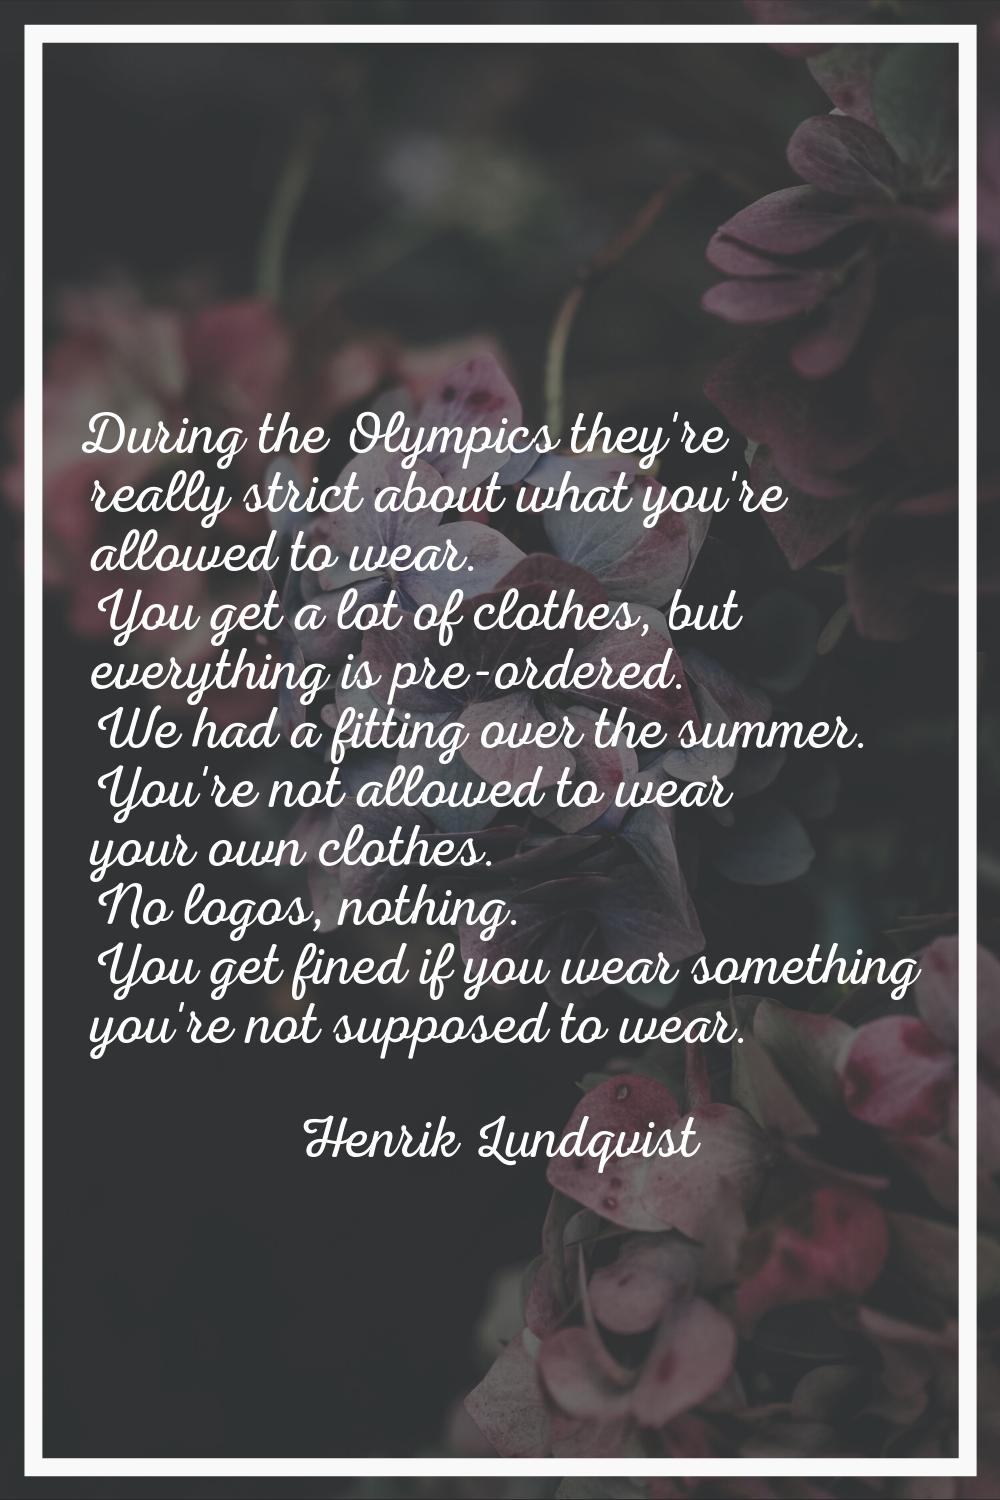 During the Olympics they're really strict about what you're allowed to wear. You get a lot of cloth